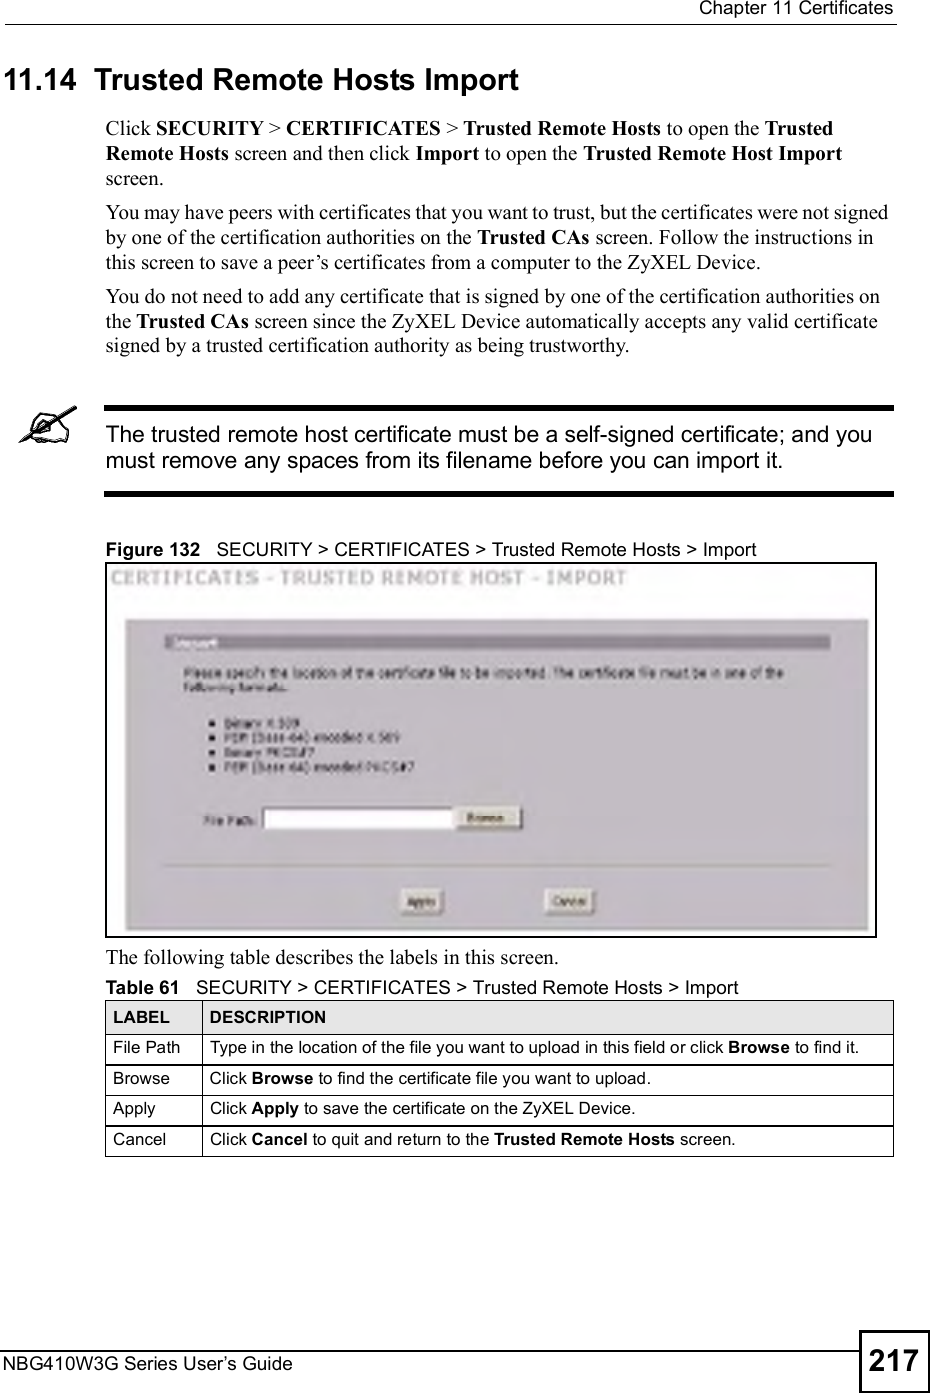  Chapter 11CertificatesNBG410W3G Series User s Guide 21711.14  Trusted Remote Hosts Import   Click SECURITY &gt; CERTIFICATES &gt; Trusted Remote Hosts to open the Trusted Remote Hosts screen and then click Import to open the Trusted Remote Host Import screen. You may have peers with certificates that you want to trust, but the certificates were not signed by one of the certification authorities on the Trusted CAs screen. Follow the instructions in this screen to save a peer!s certificates from a computer to the ZyXEL Device.You do not need to add any certificate that is signed by one of the certification authorities on the Trusted CAs screen since the ZyXEL Device automatically accepts any valid certificate signed by a trusted certification authority as being trustworthy.The trusted remote host certificate must be a self-signed certificate; and you must remove any spaces from its filename before you can import it.Figure 132   SECURITY &gt; CERTIFICATES &gt; Trusted Remote Hosts &gt; ImportThe following table describes the labels in this screen. Table 61   SECURITY &gt; CERTIFICATES &gt; Trusted Remote Hosts &gt; ImportLABEL DESCRIPTIONFile Path Type in the location of the file you want to upload in this field or click Browse to find it.Browse Click Browse to find the certificate file you want to upload. ApplyClick Apply to save the certificate on the ZyXEL Device.CancelClick Cancel to quit and return to the Trusted Remote Hosts screen.